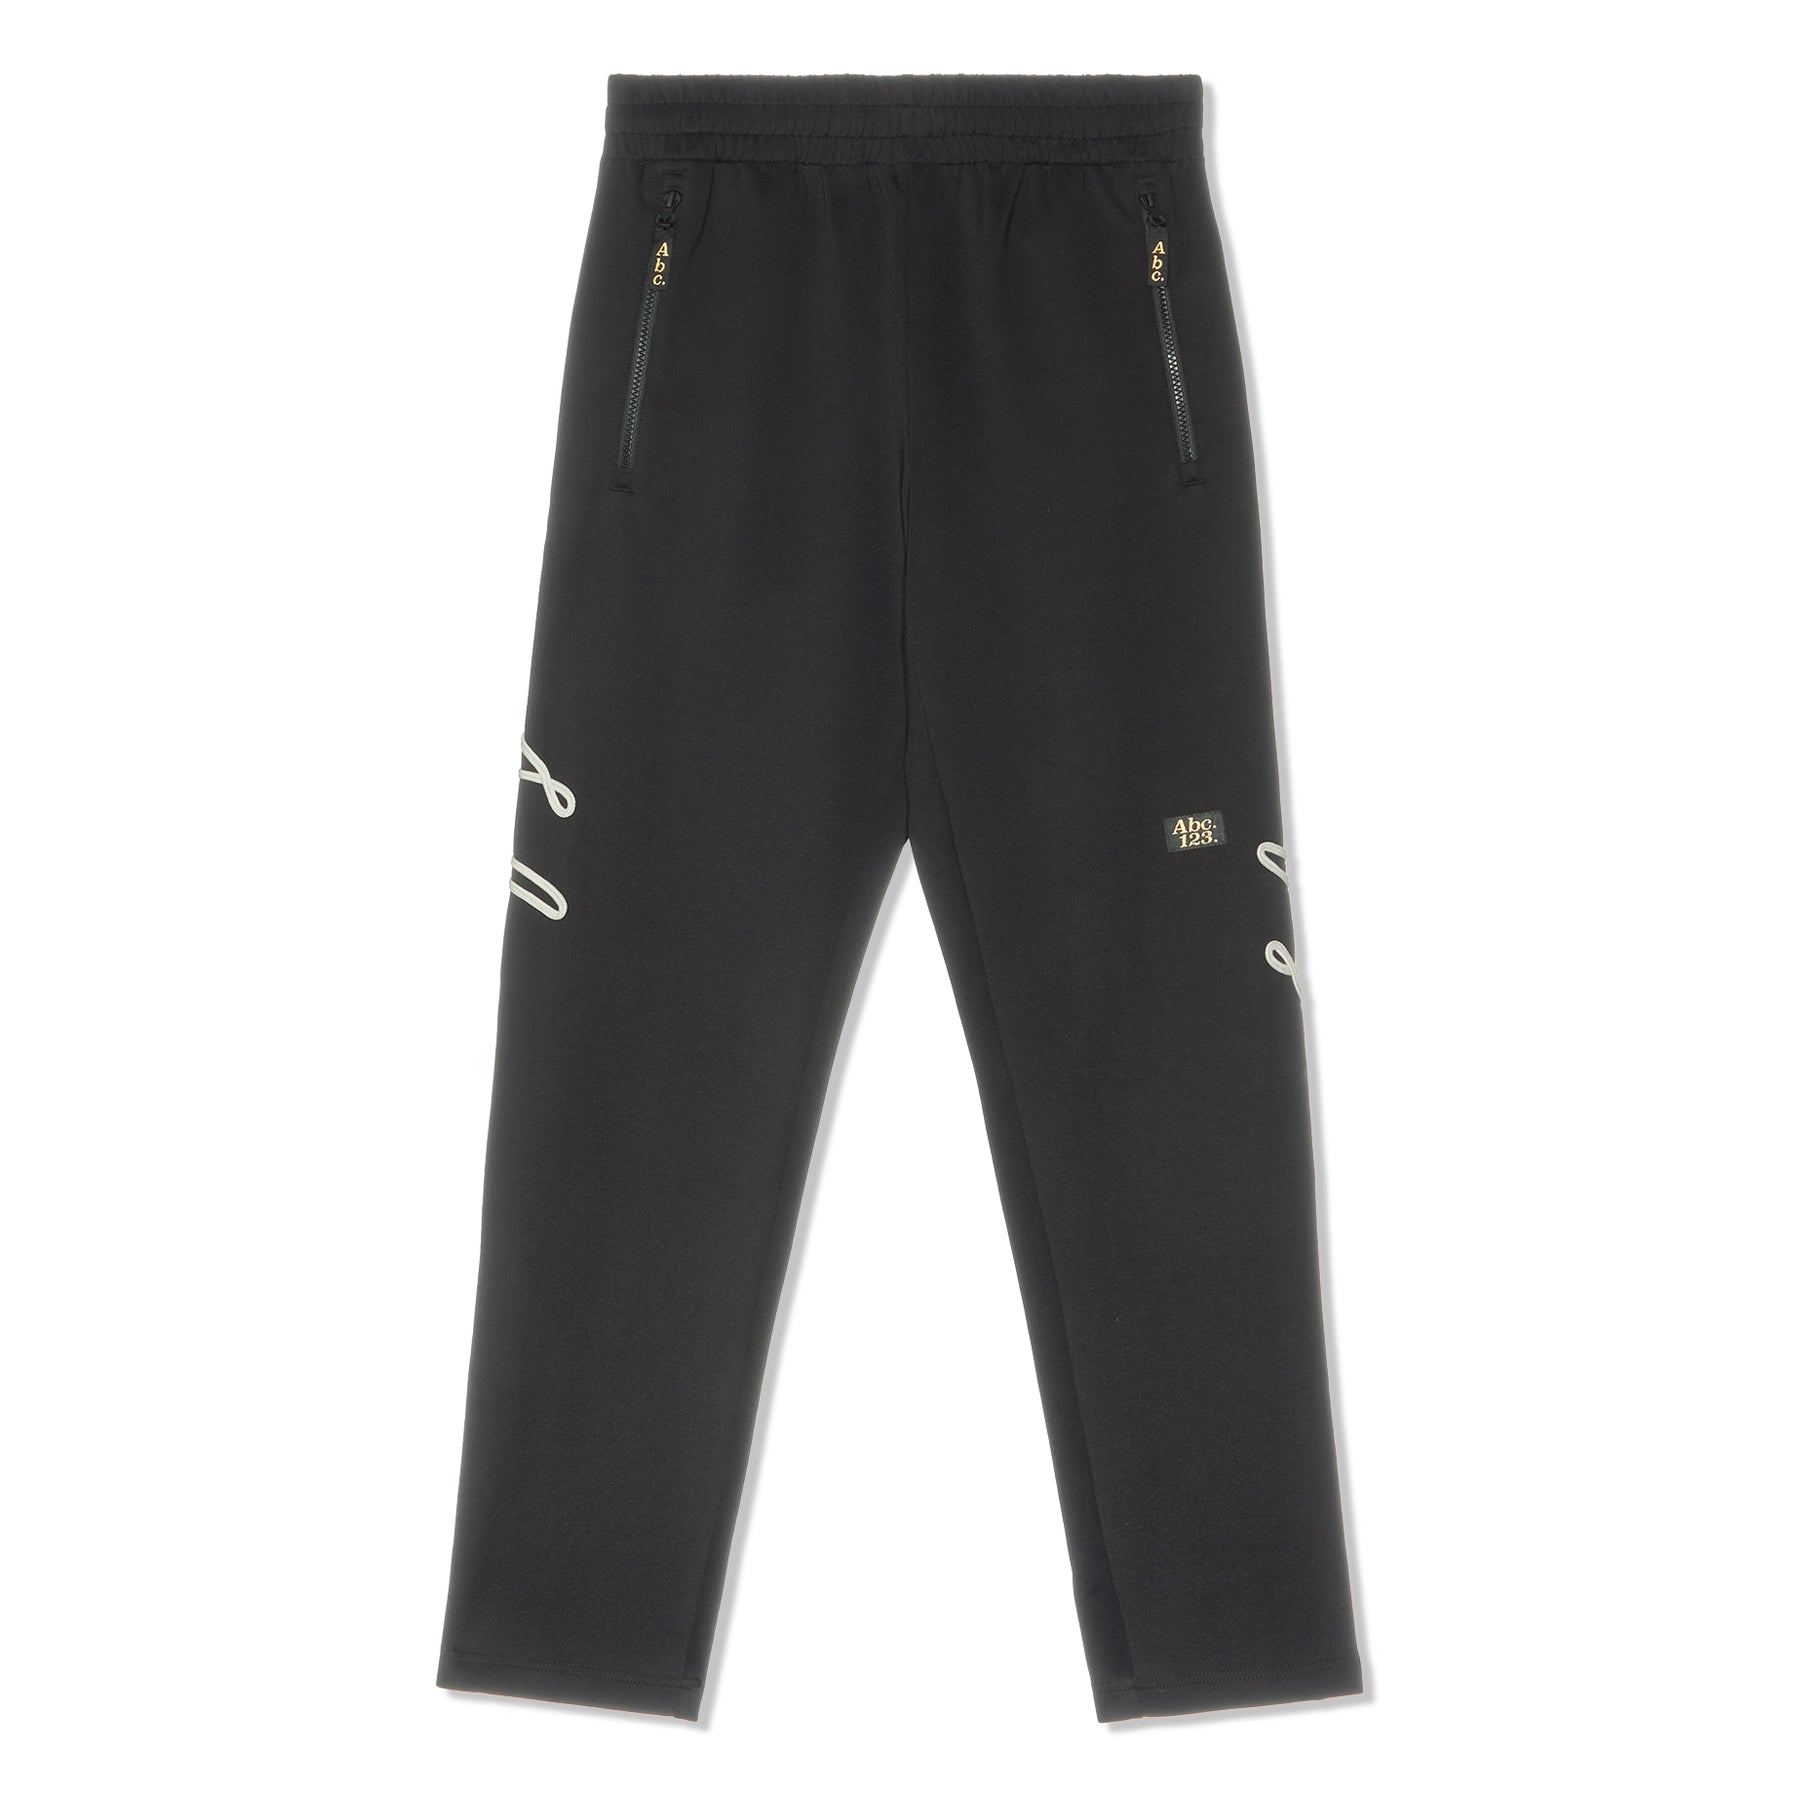 Track Pant, Night Pant ( Medium Size) Age Group 13 to 15 Years